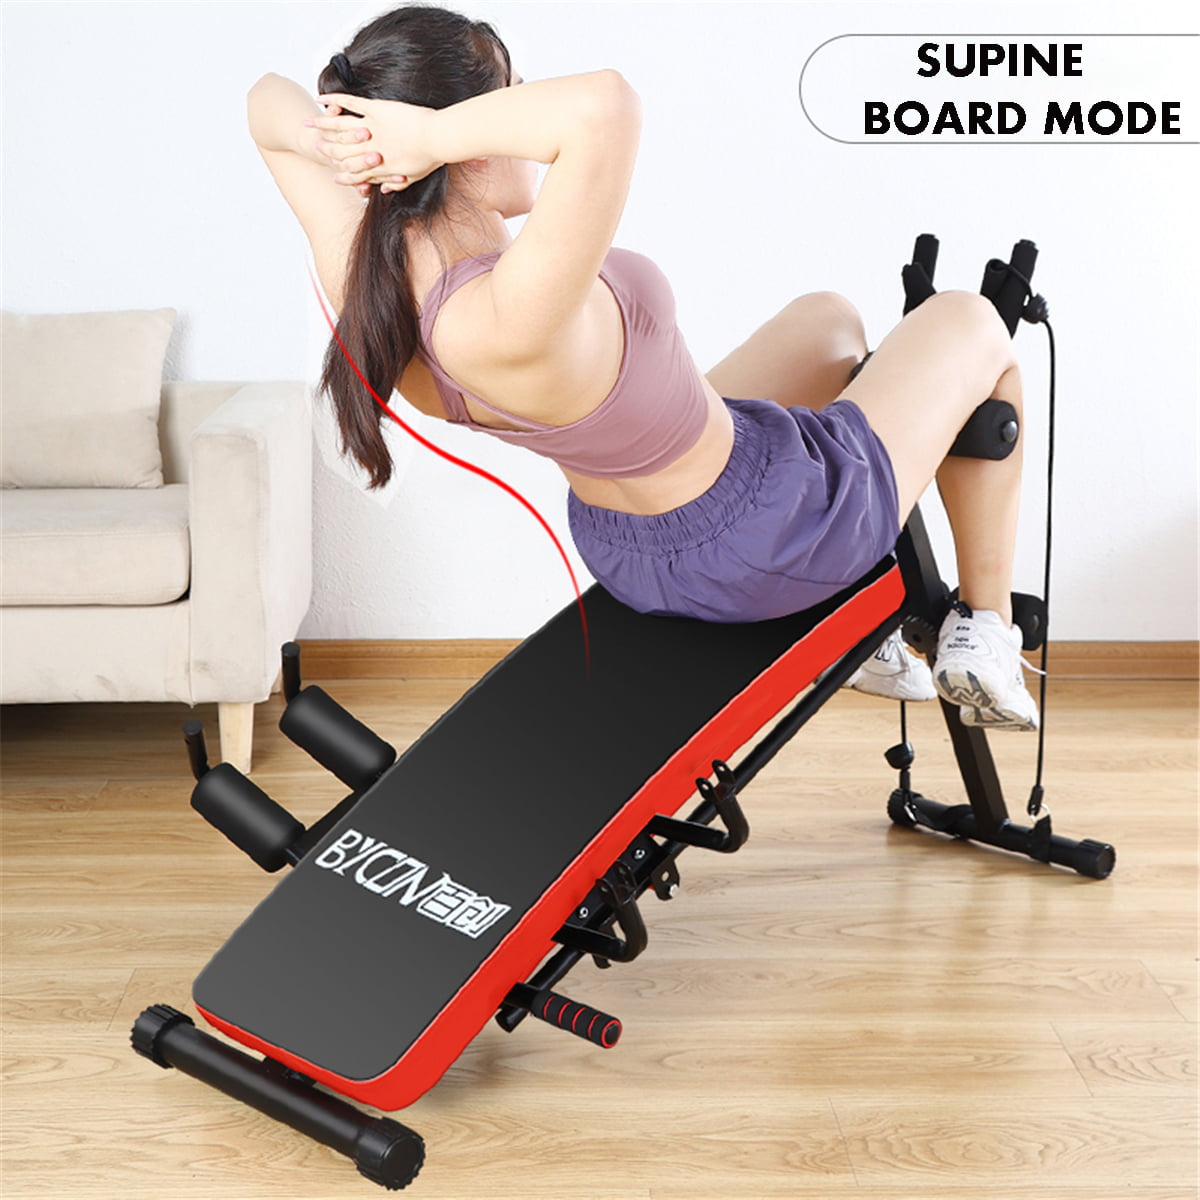 Sit Up Bench Decline Abdominal Fitness Home Gym Exercise Workout Equipment 2021 